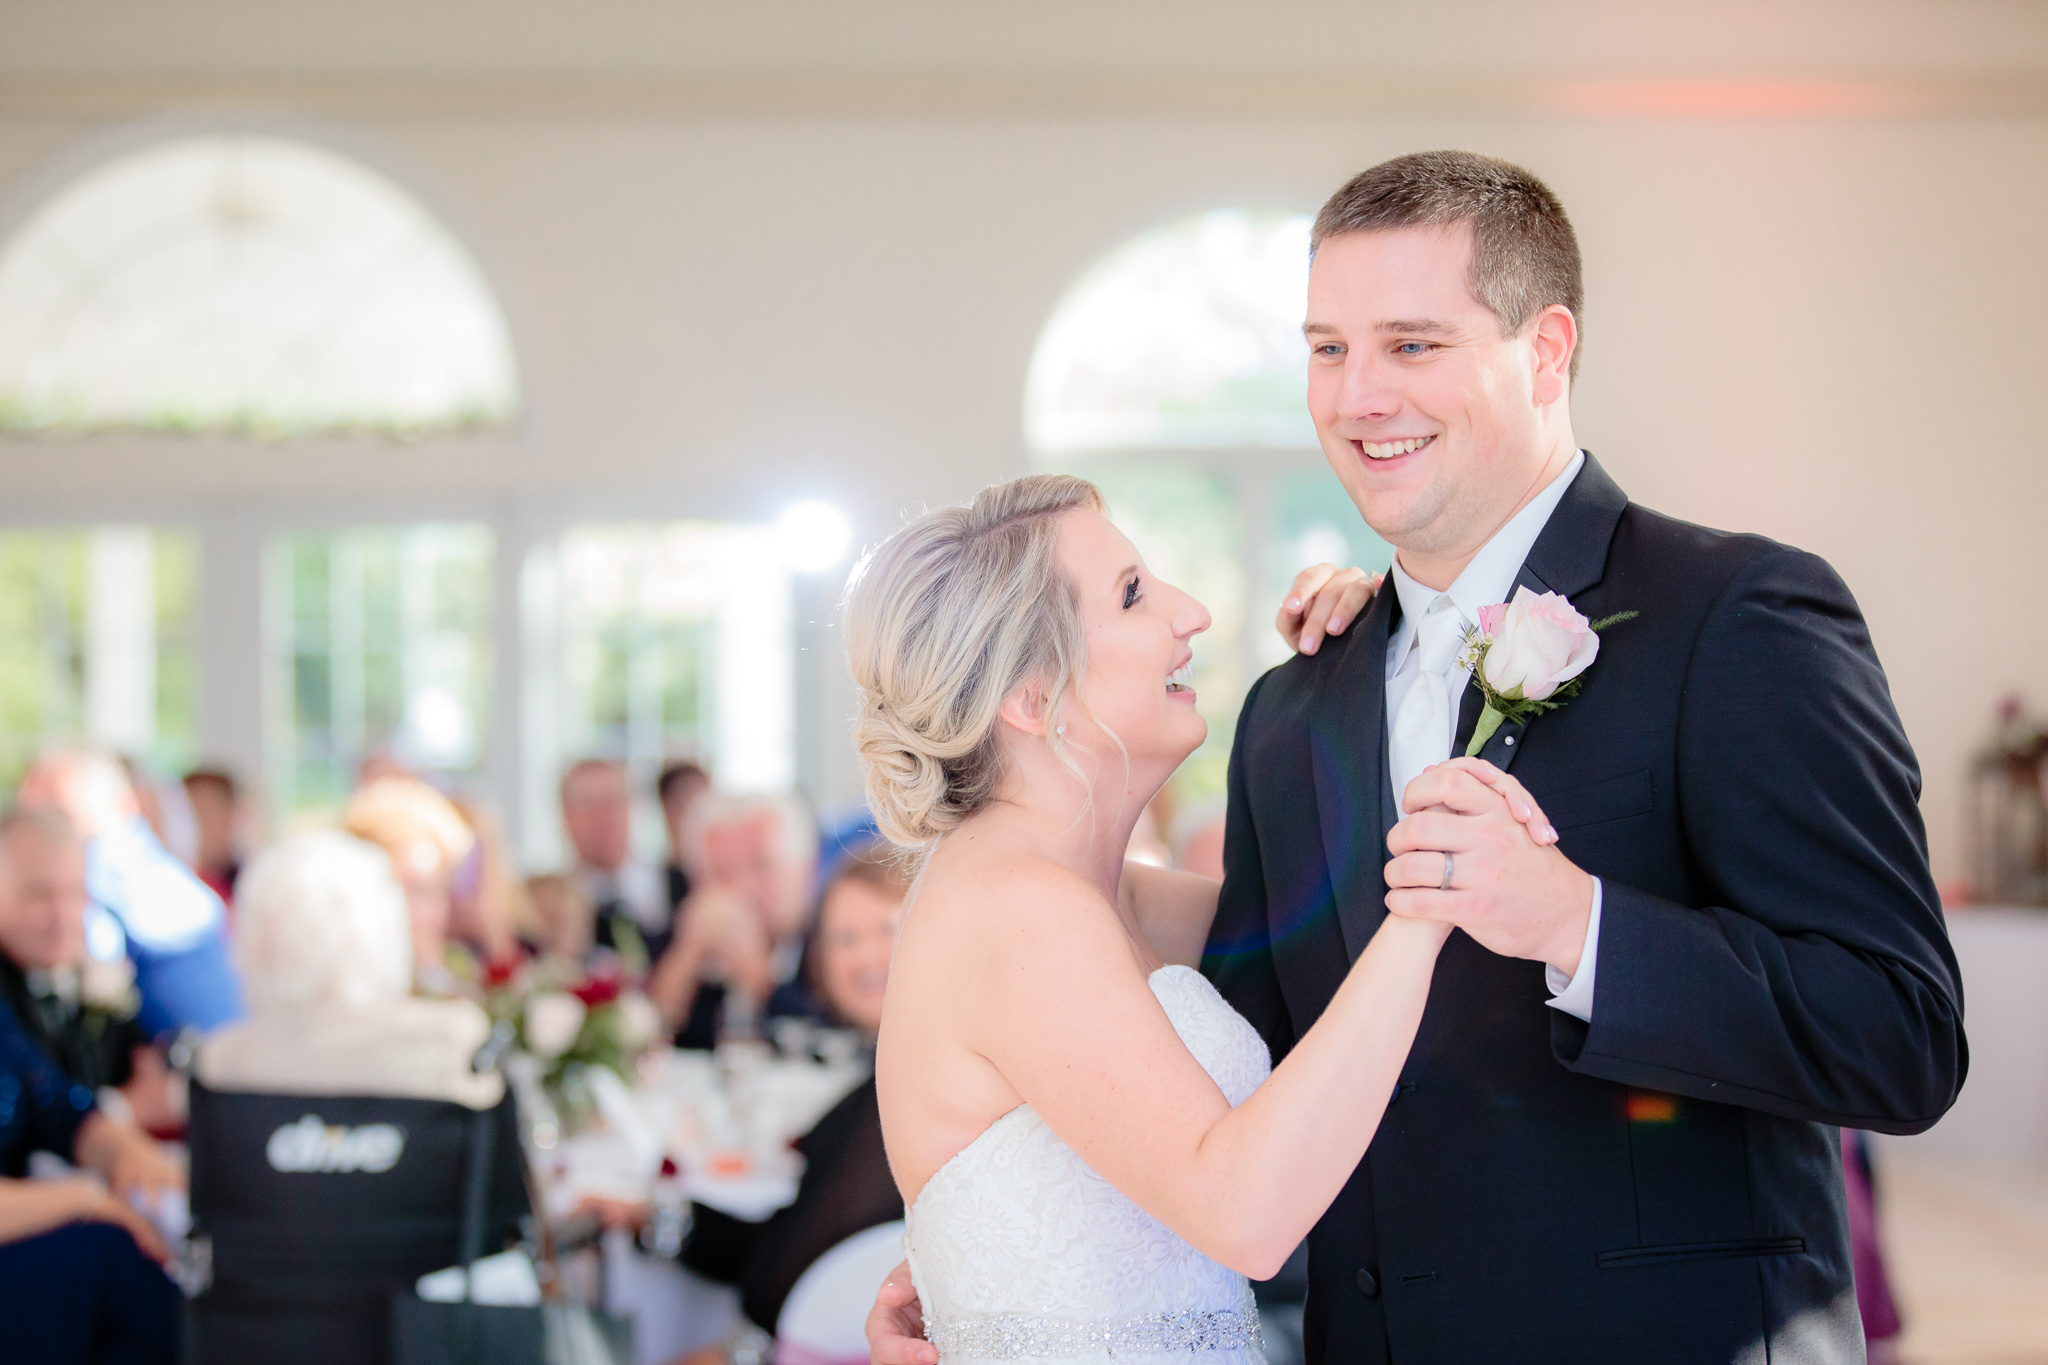 Bride & groom's first dance at Greystone Fields